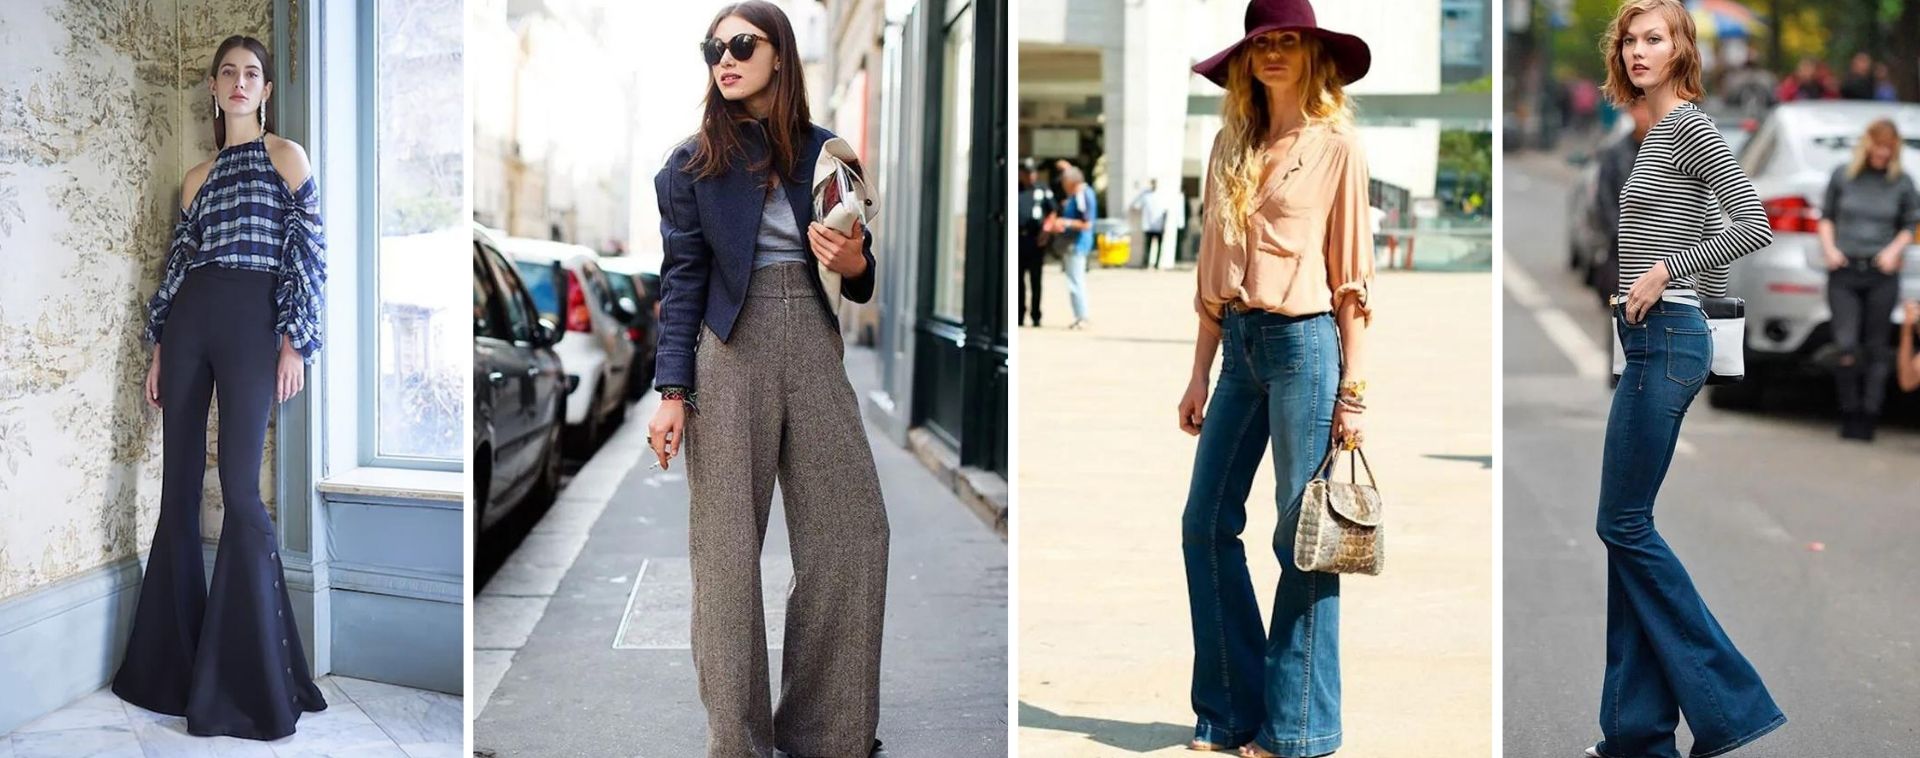 What to wear with bell-bottom pants? [Fashion Guide]